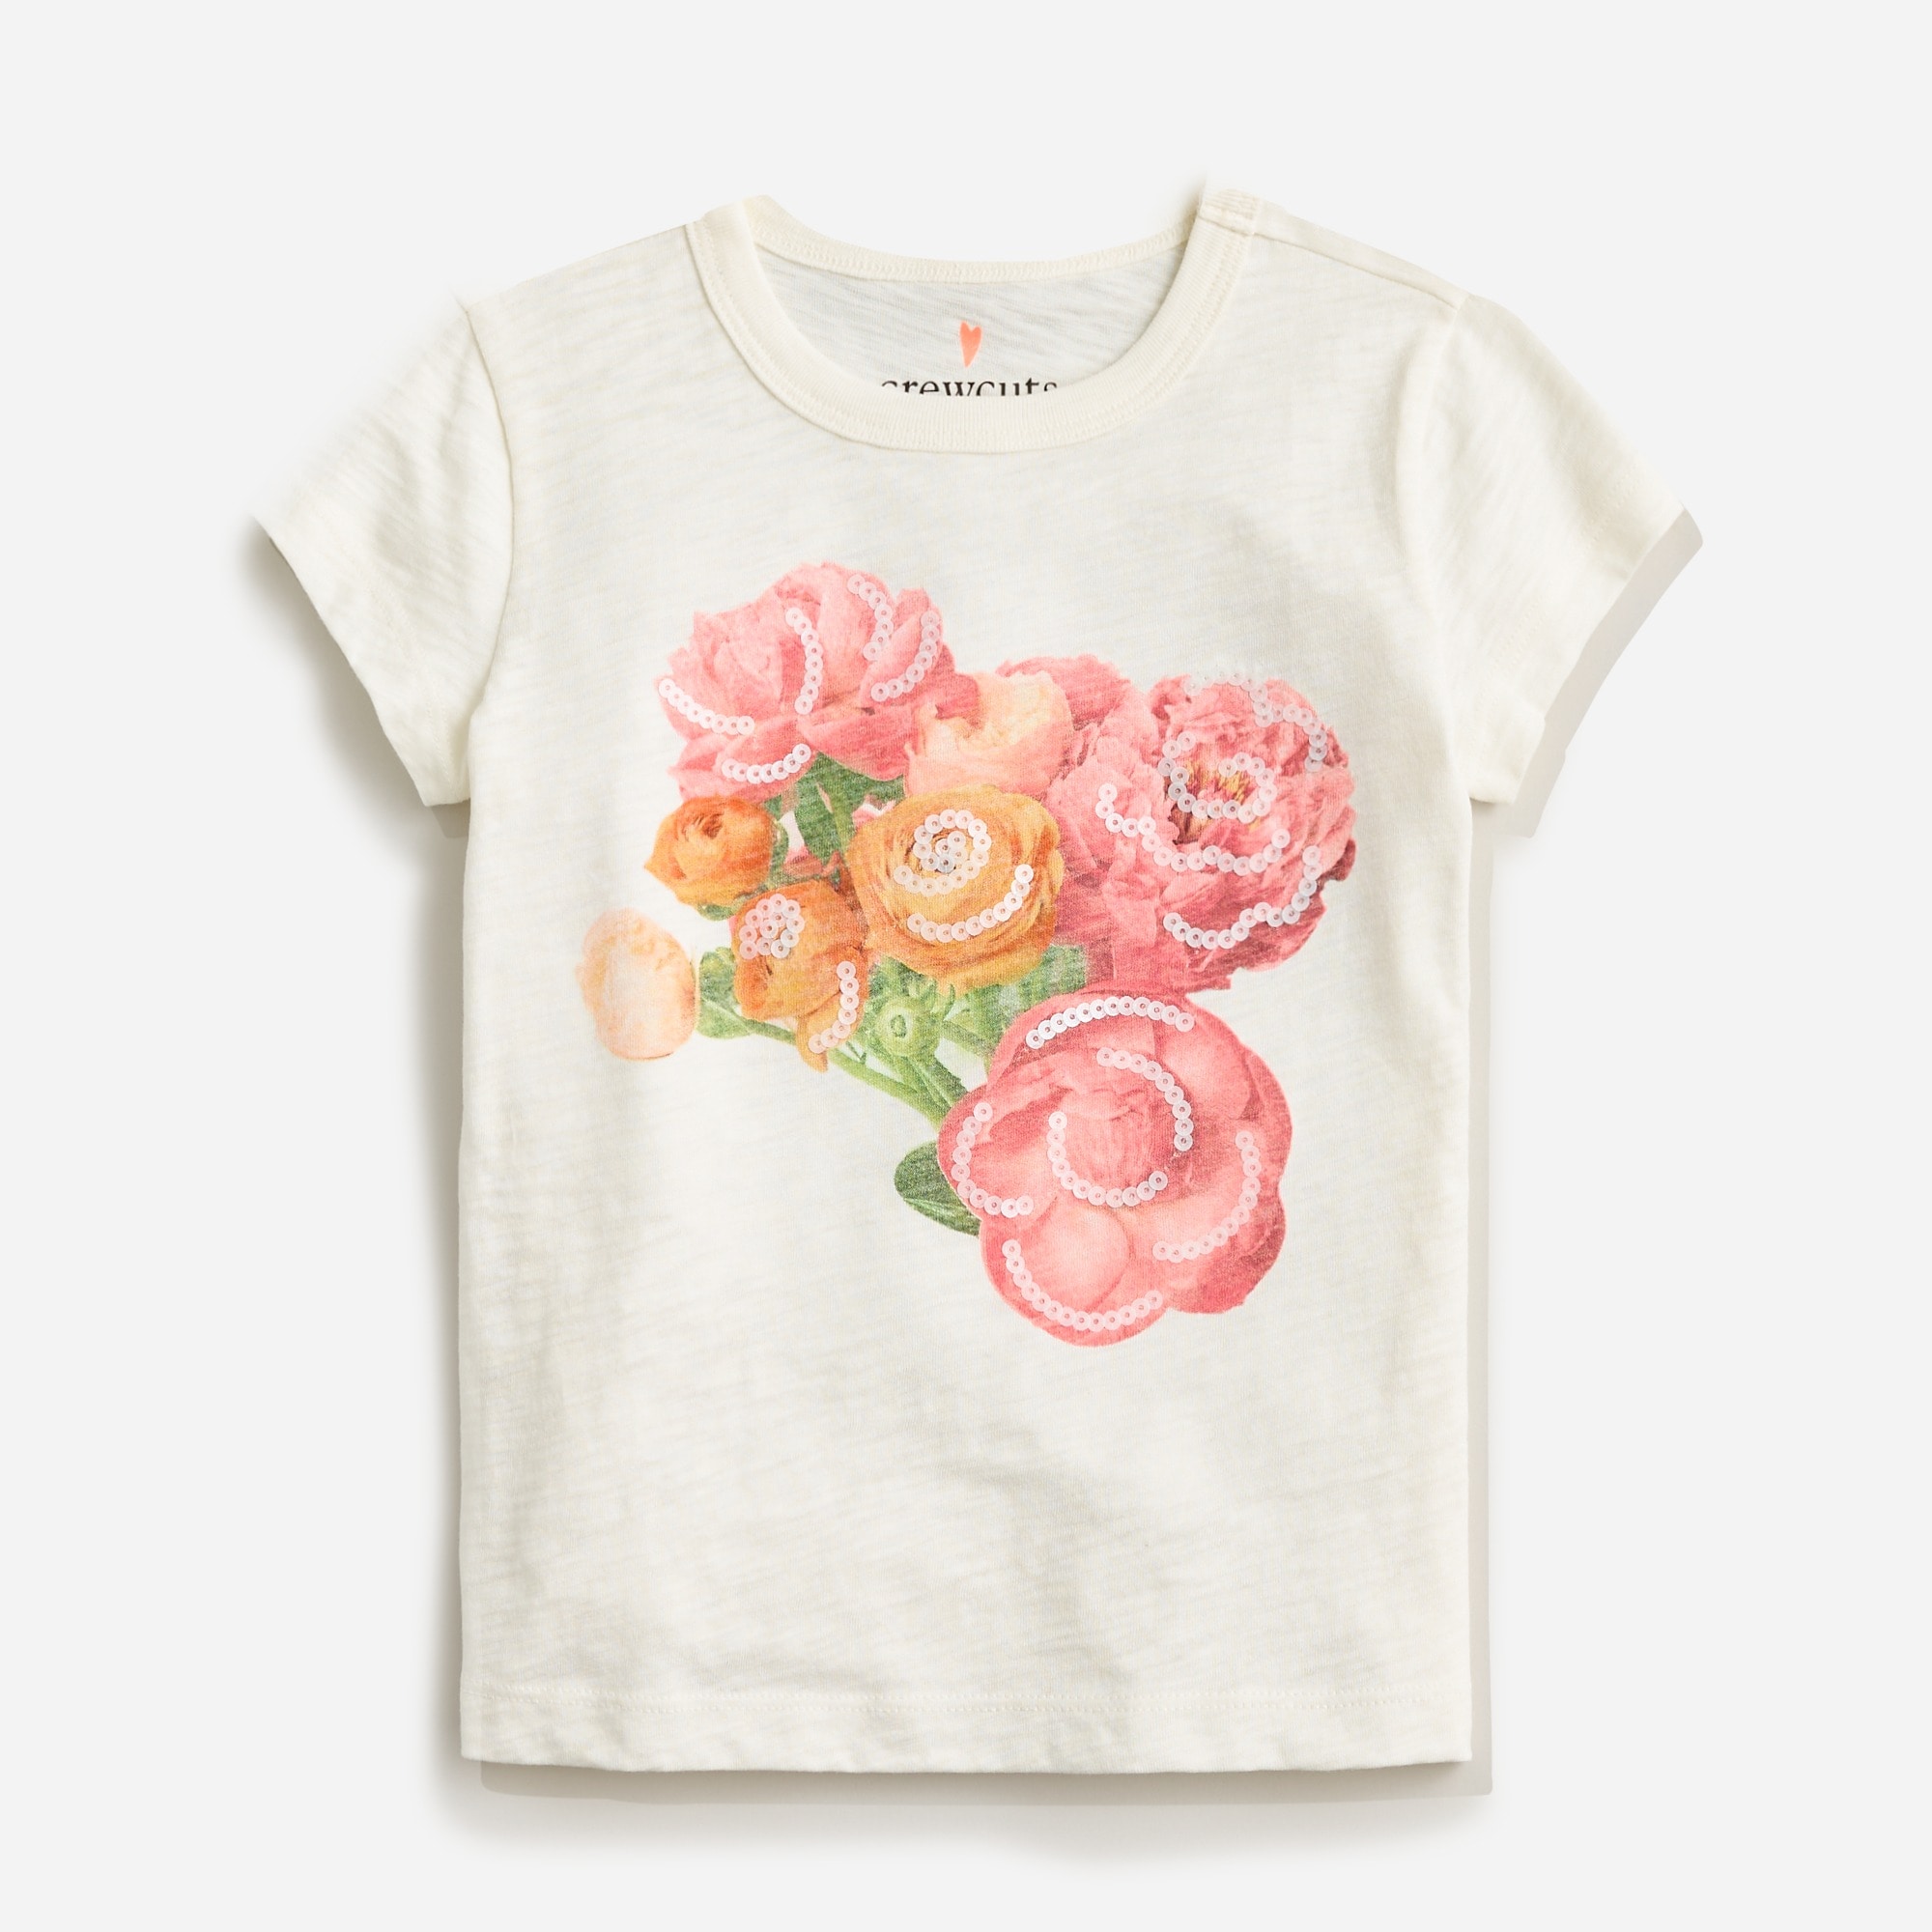 Jcrew Girls bouquet graphic T-shirt with sequins